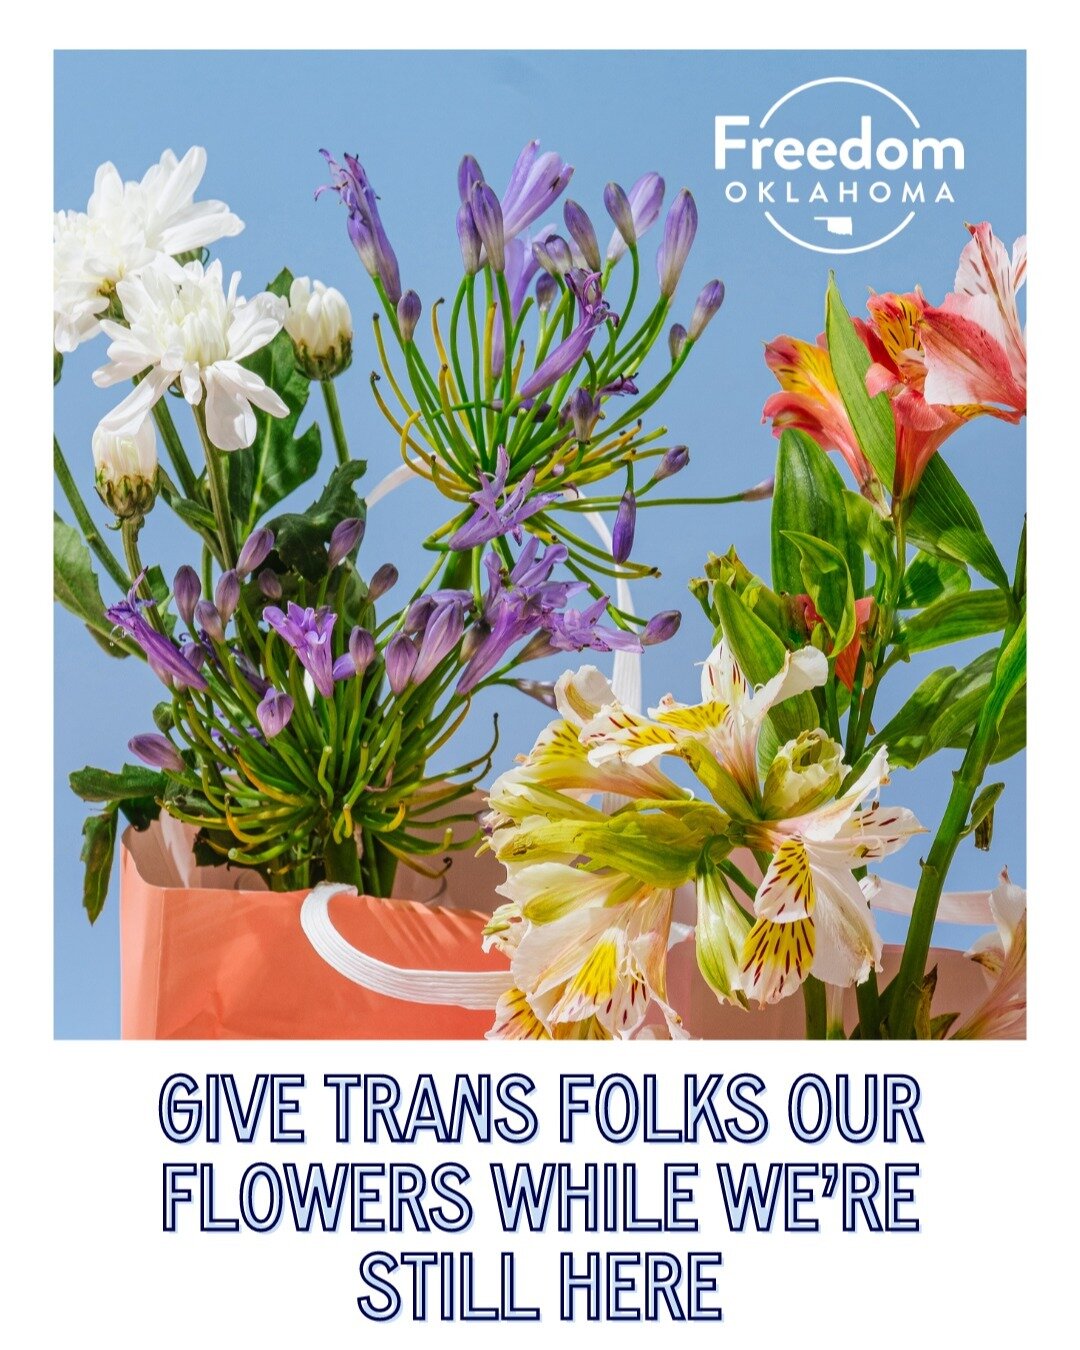 End Trans Week of Advocacy and Action by giving 2STGNC+ folks our flowers while we're still here! 

💙 Saturday, March 30th: Come out to @afterhoursmidtown in OKC between 1-4pm to share space with community, enjoy a portrait or family photo by @jessi